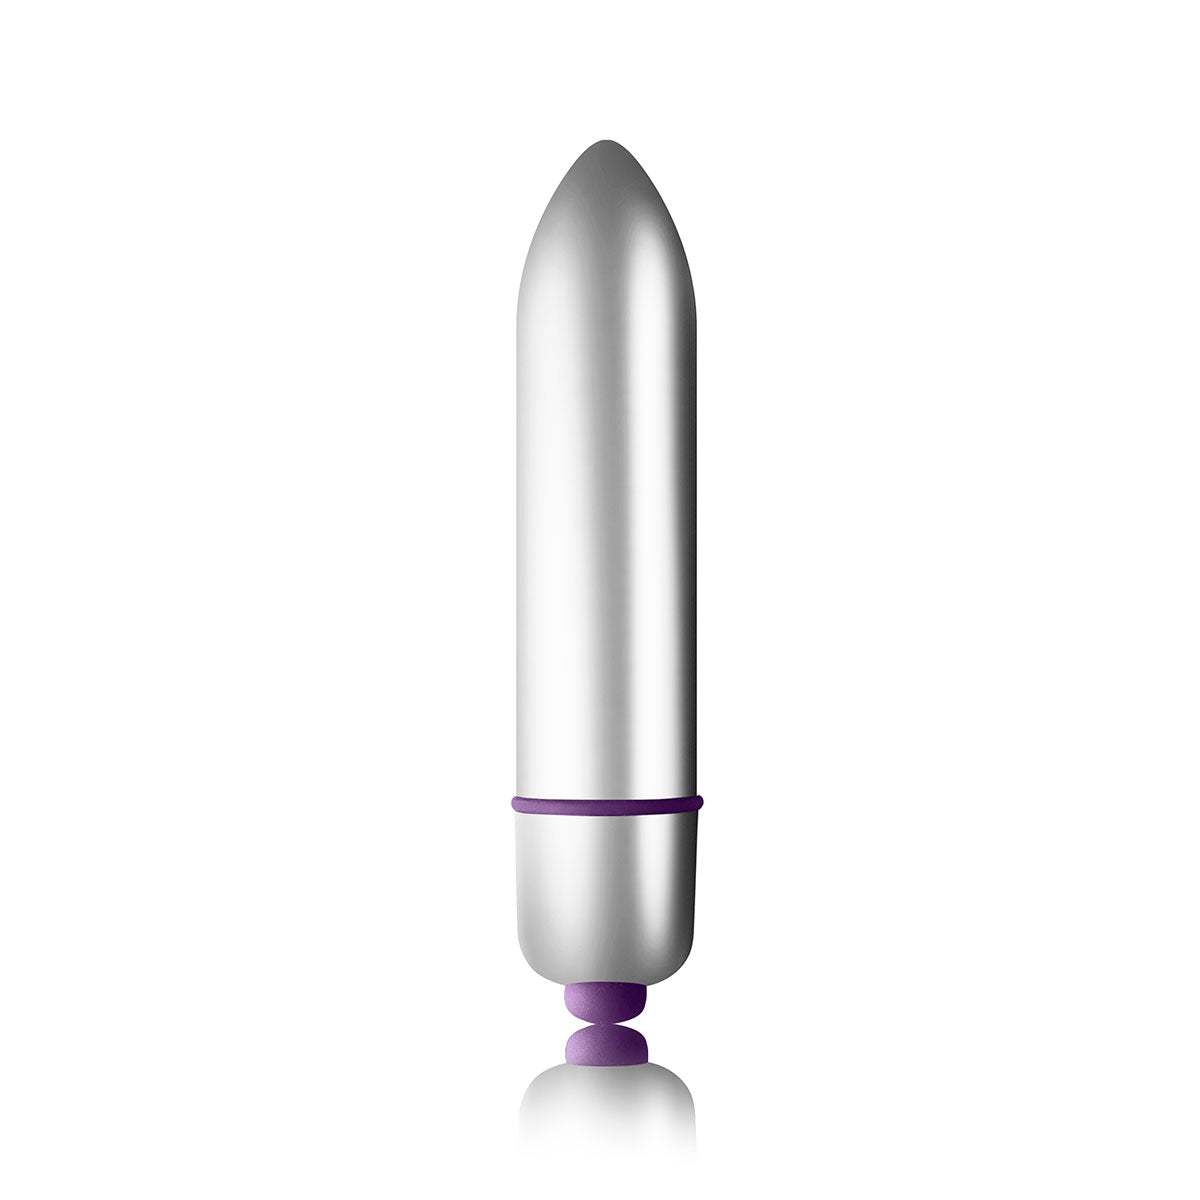 Teazer 7 Speed T-Shaped Anal Vibrating Bullet